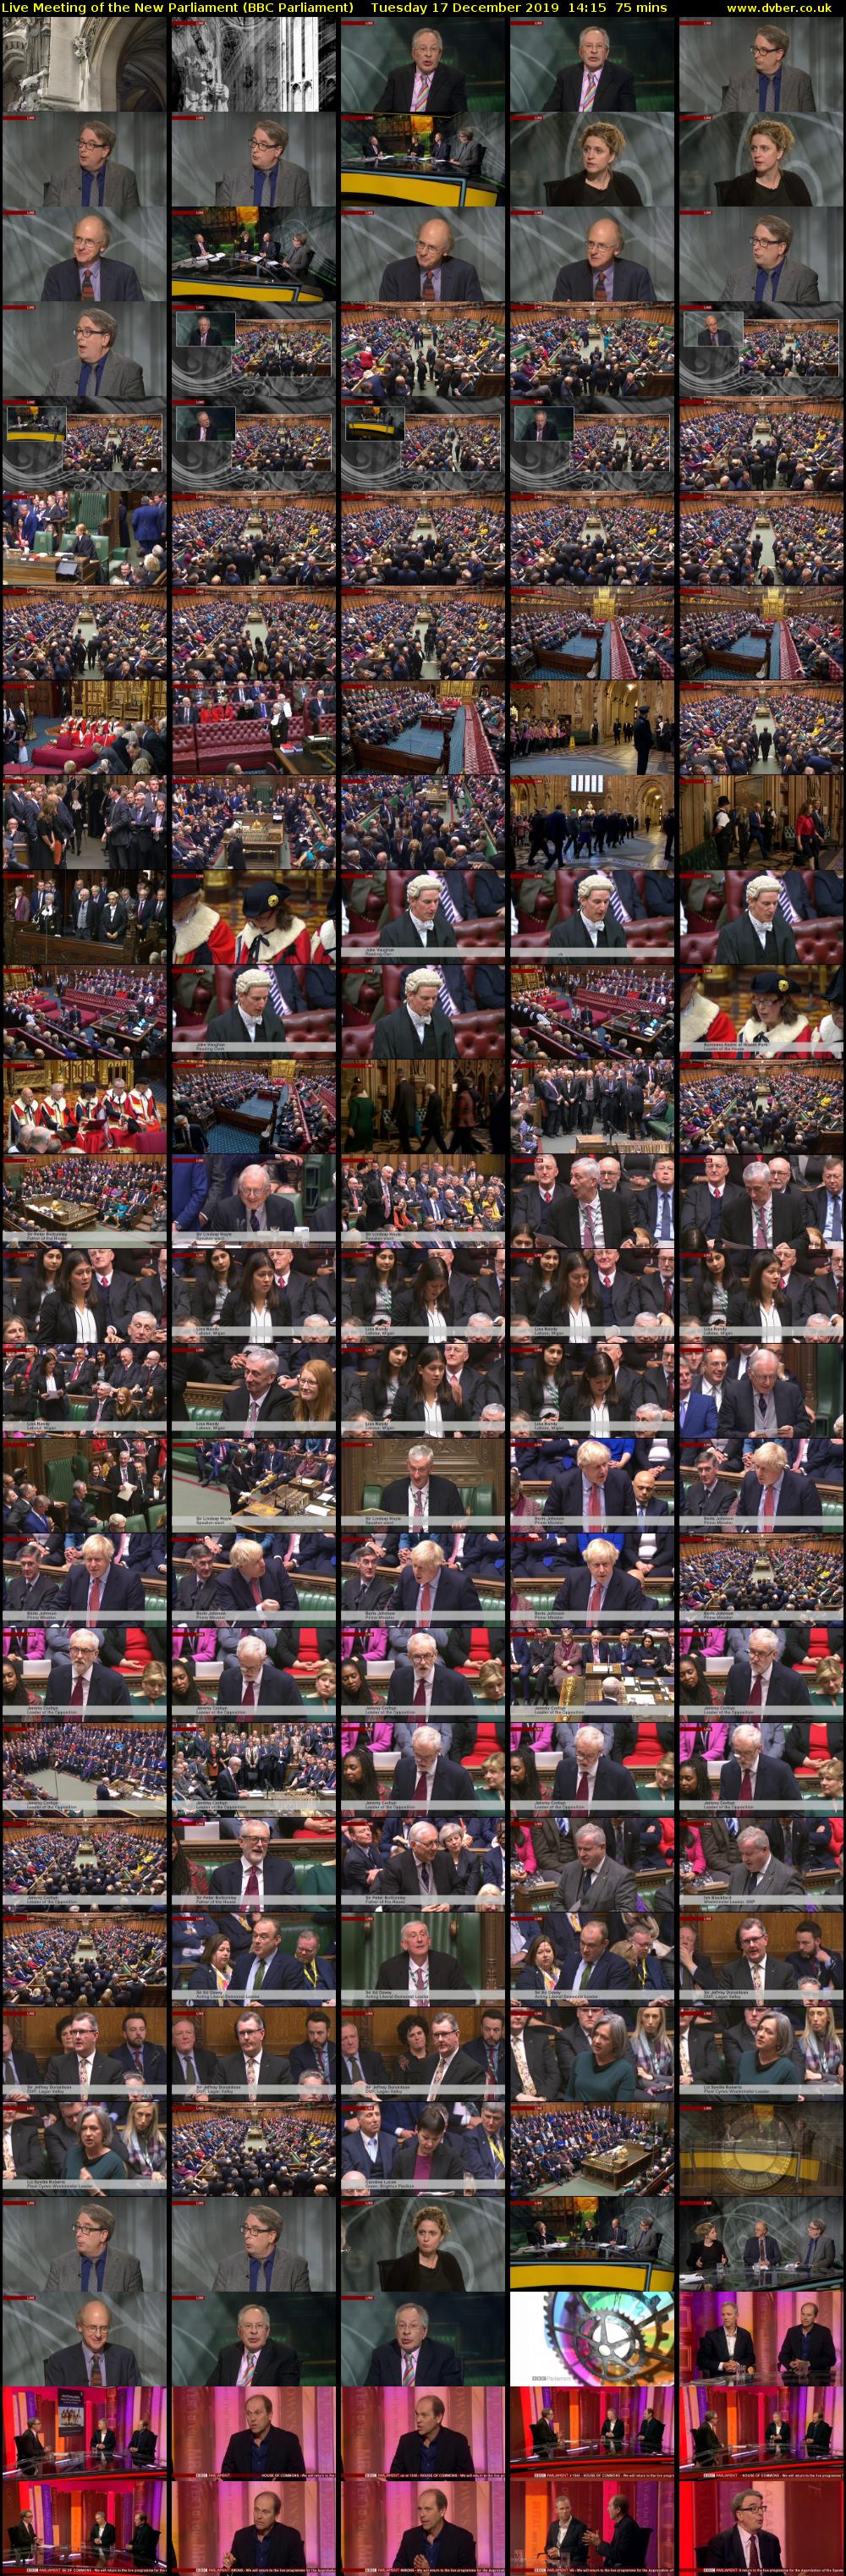 Live Meeting of the New Parliament (BBC Parliament) Tuesday 17 December 2019 14:15 - 15:30